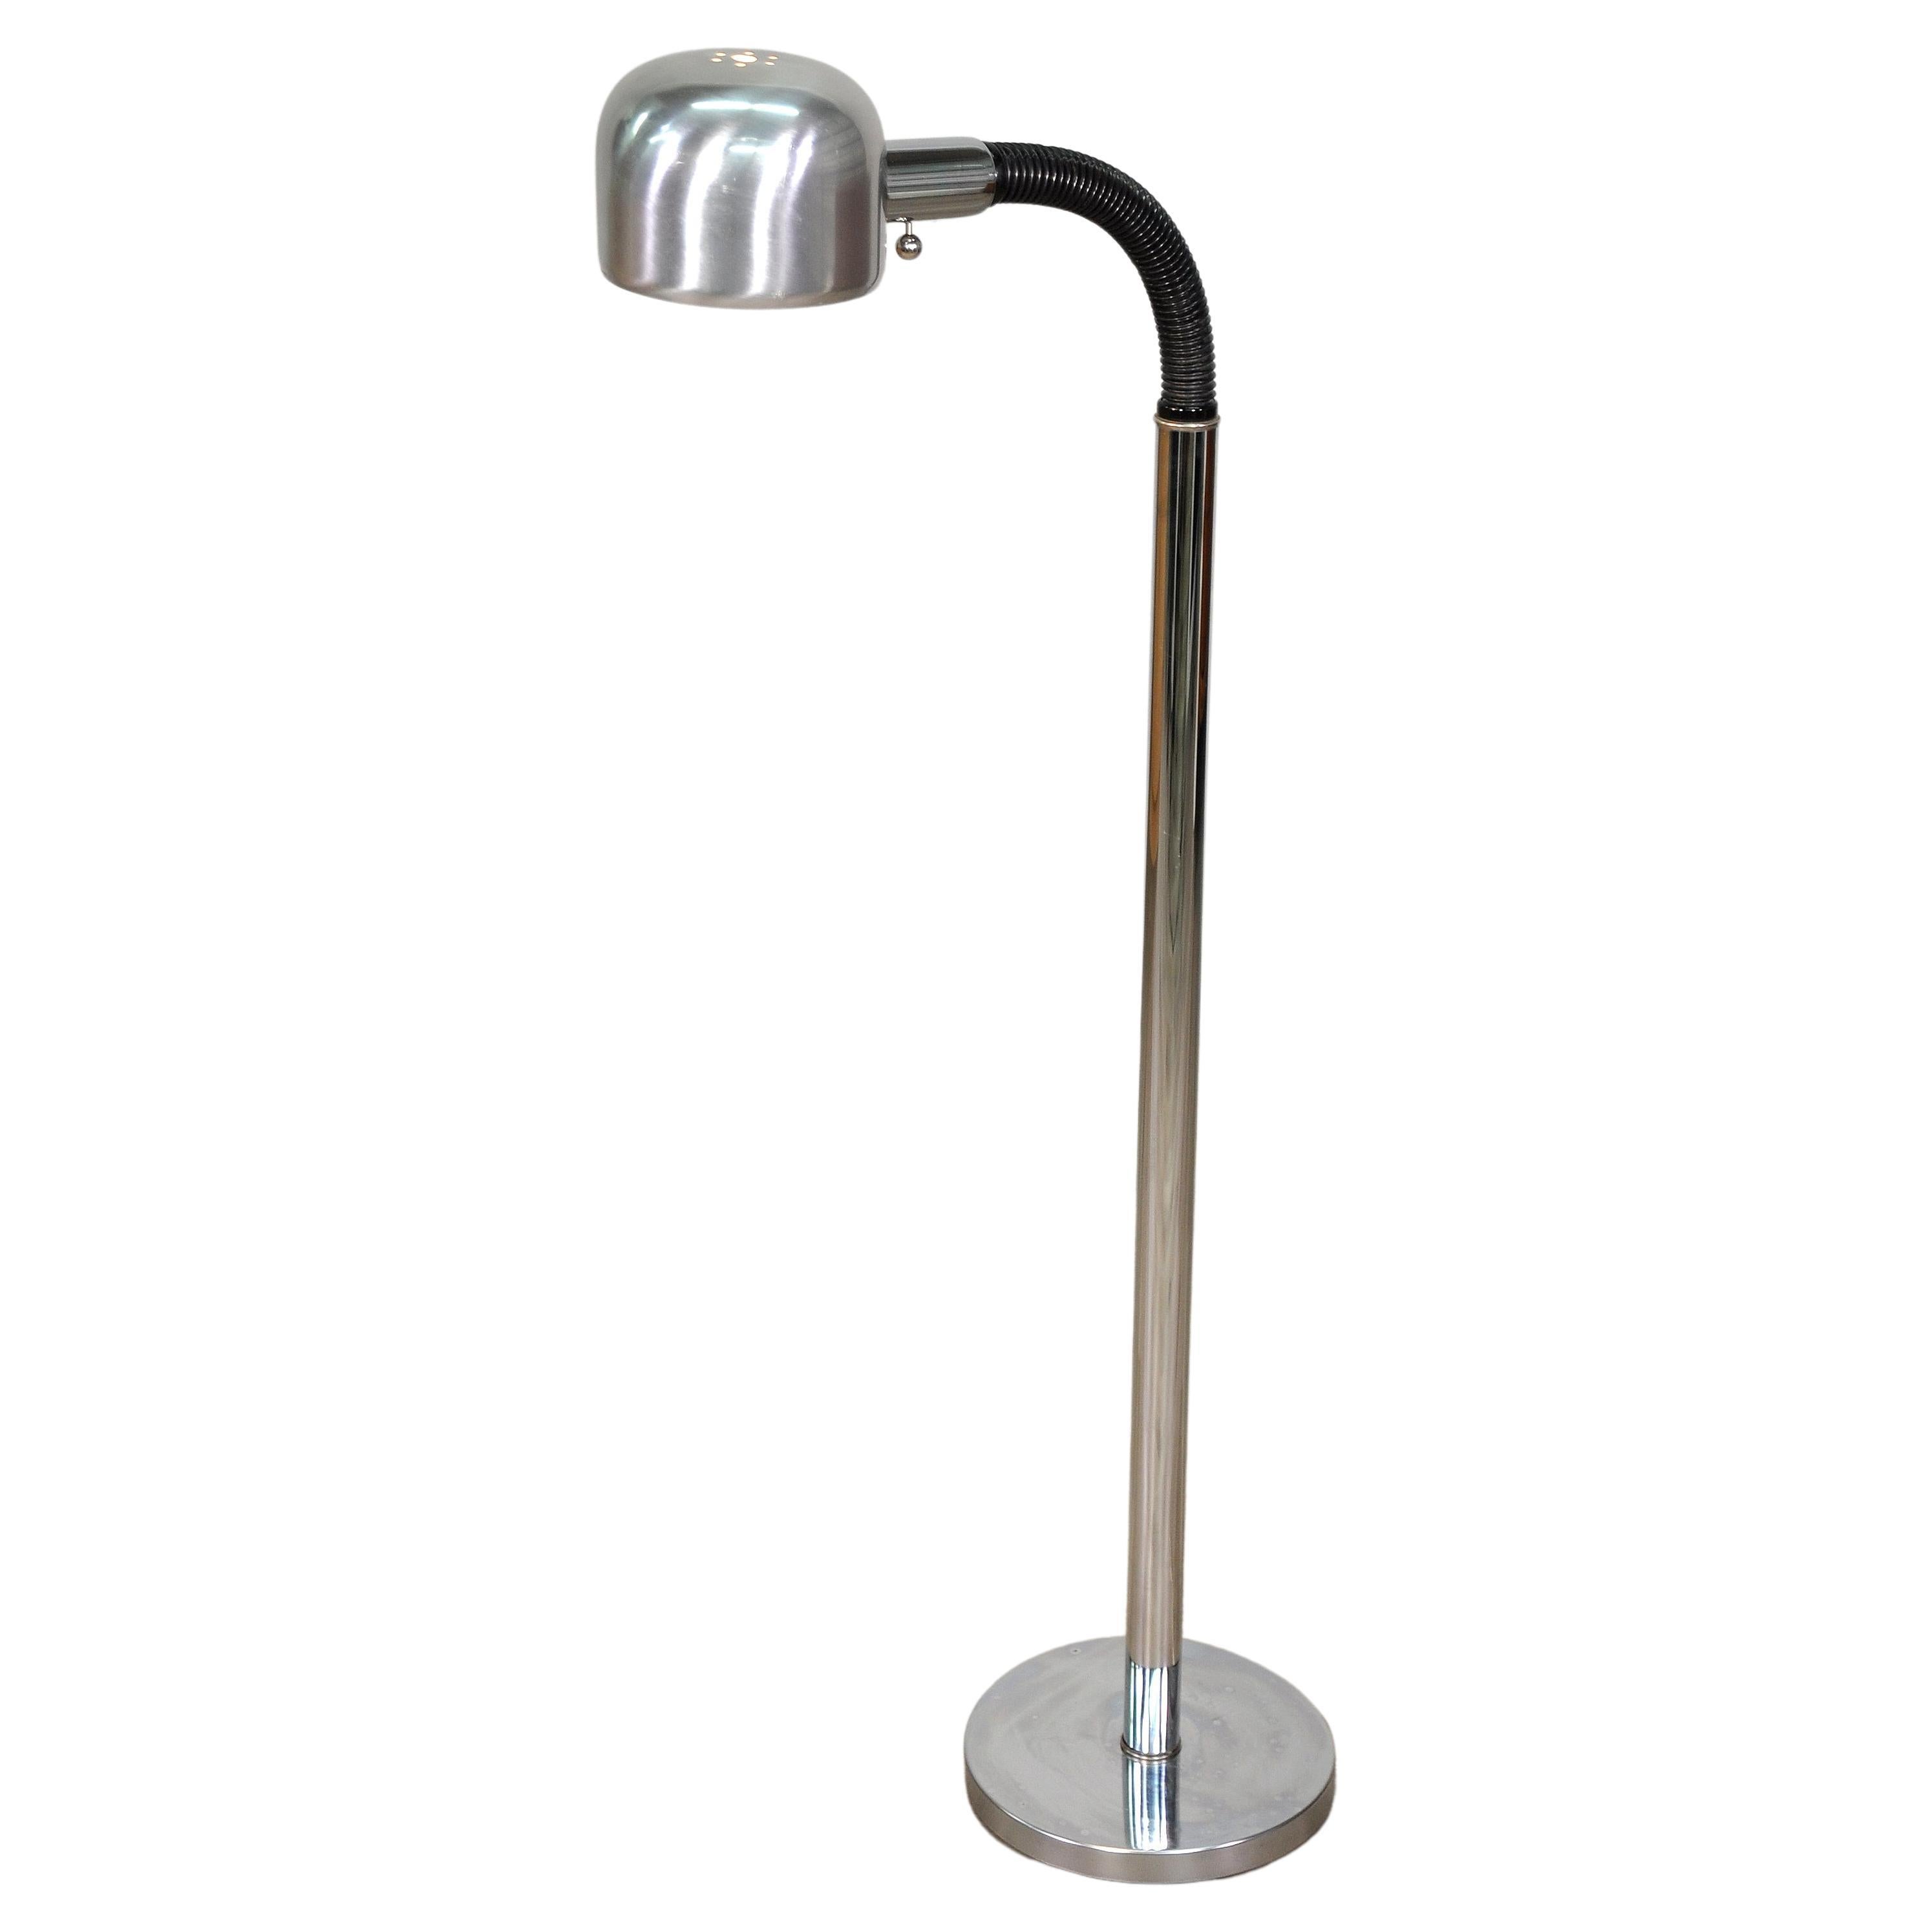 Vintage adjustable gooseneck chrome floor lamp by Alsy Manufacturing. The postmodern lamp features a round base and black articulating neck, making it adjustable to different angles and heights, ranging from 42